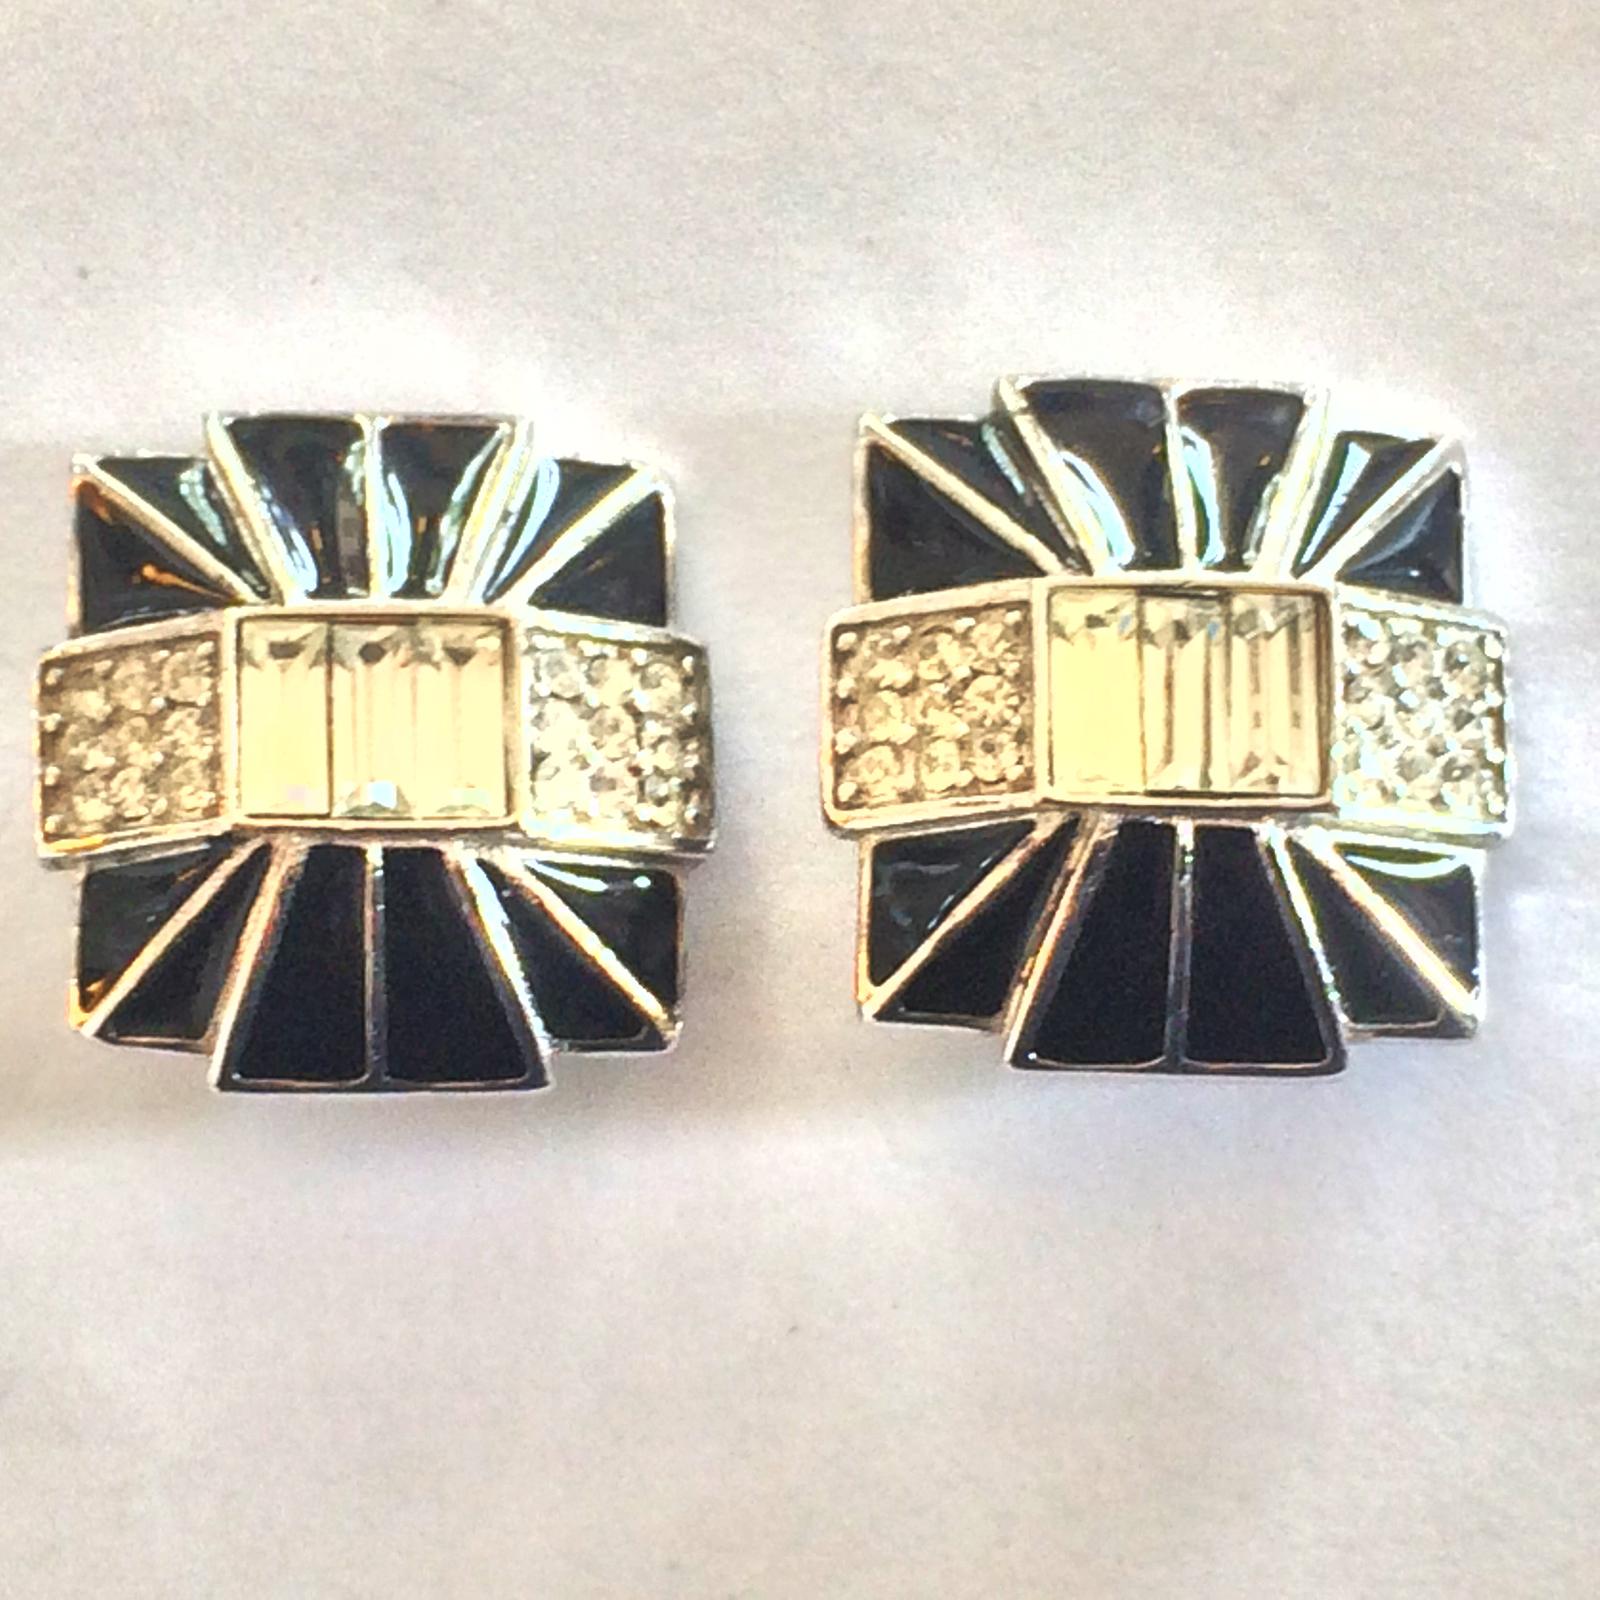 Modernist Art Deco Revival Clip earrings by Givenchy